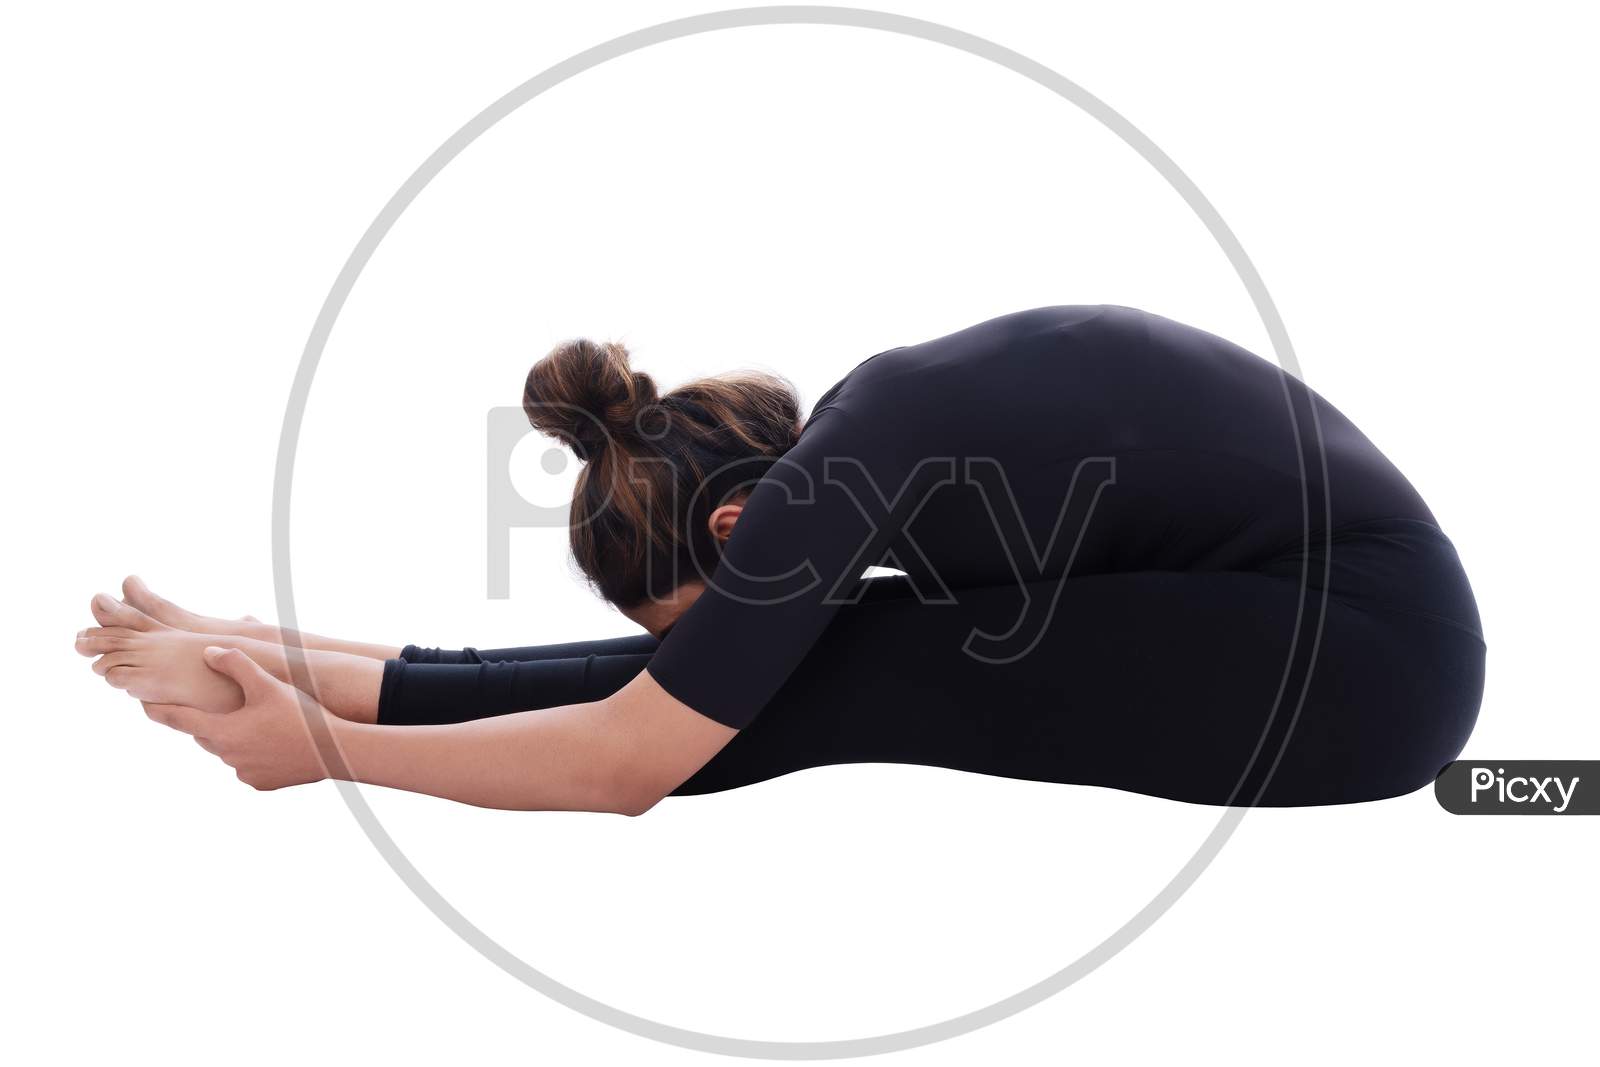 Young Indian female performing yoga